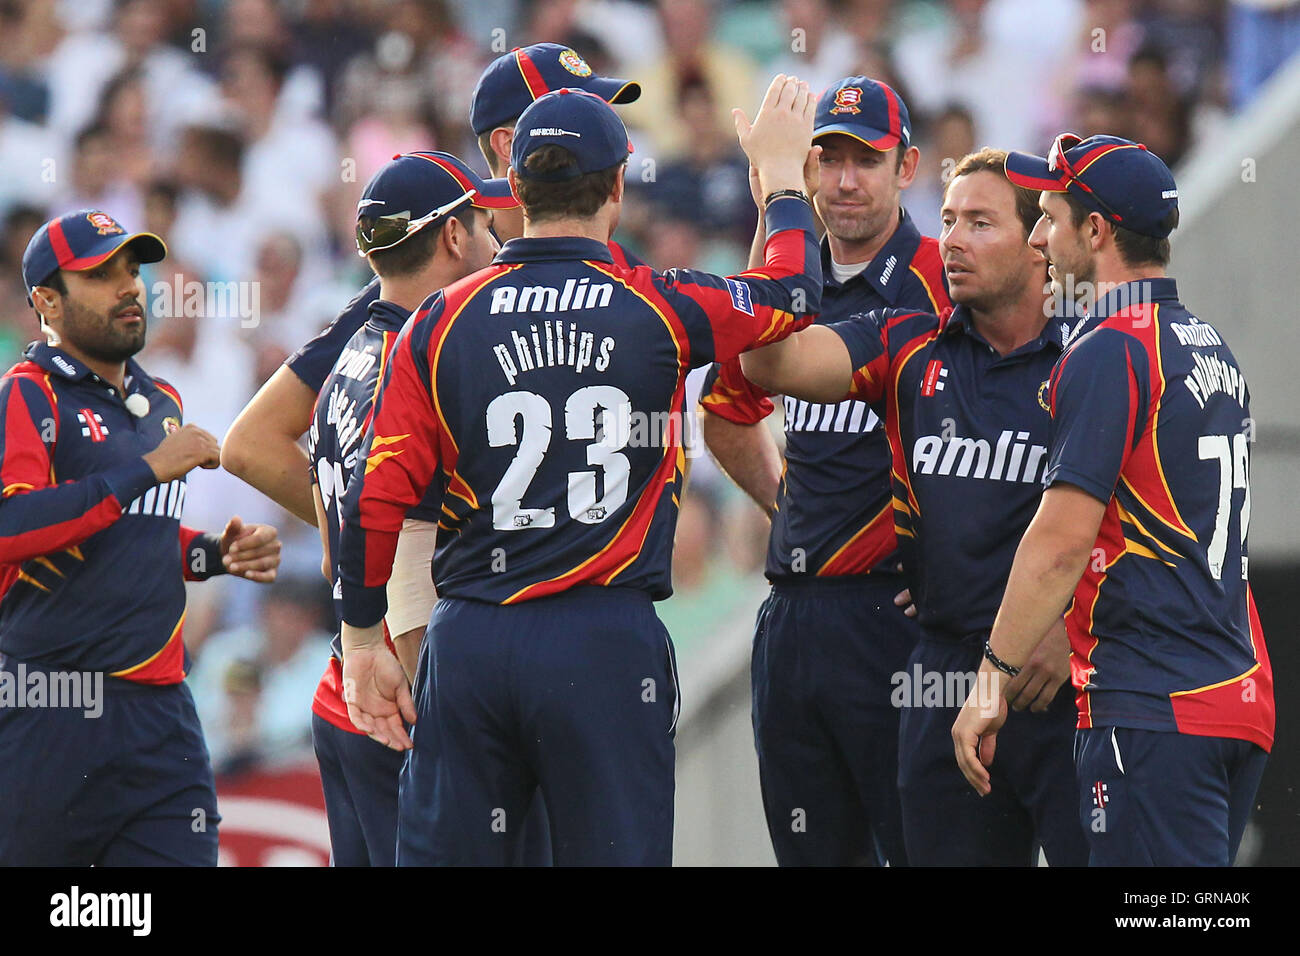 Essex players celebrate the wicket of Steven Davies - Surrey Lions vs Essex Eagles - Friends Life T20 Cricket at the Kia Oval, Kennington, London - 15/07/13 Stock Photo